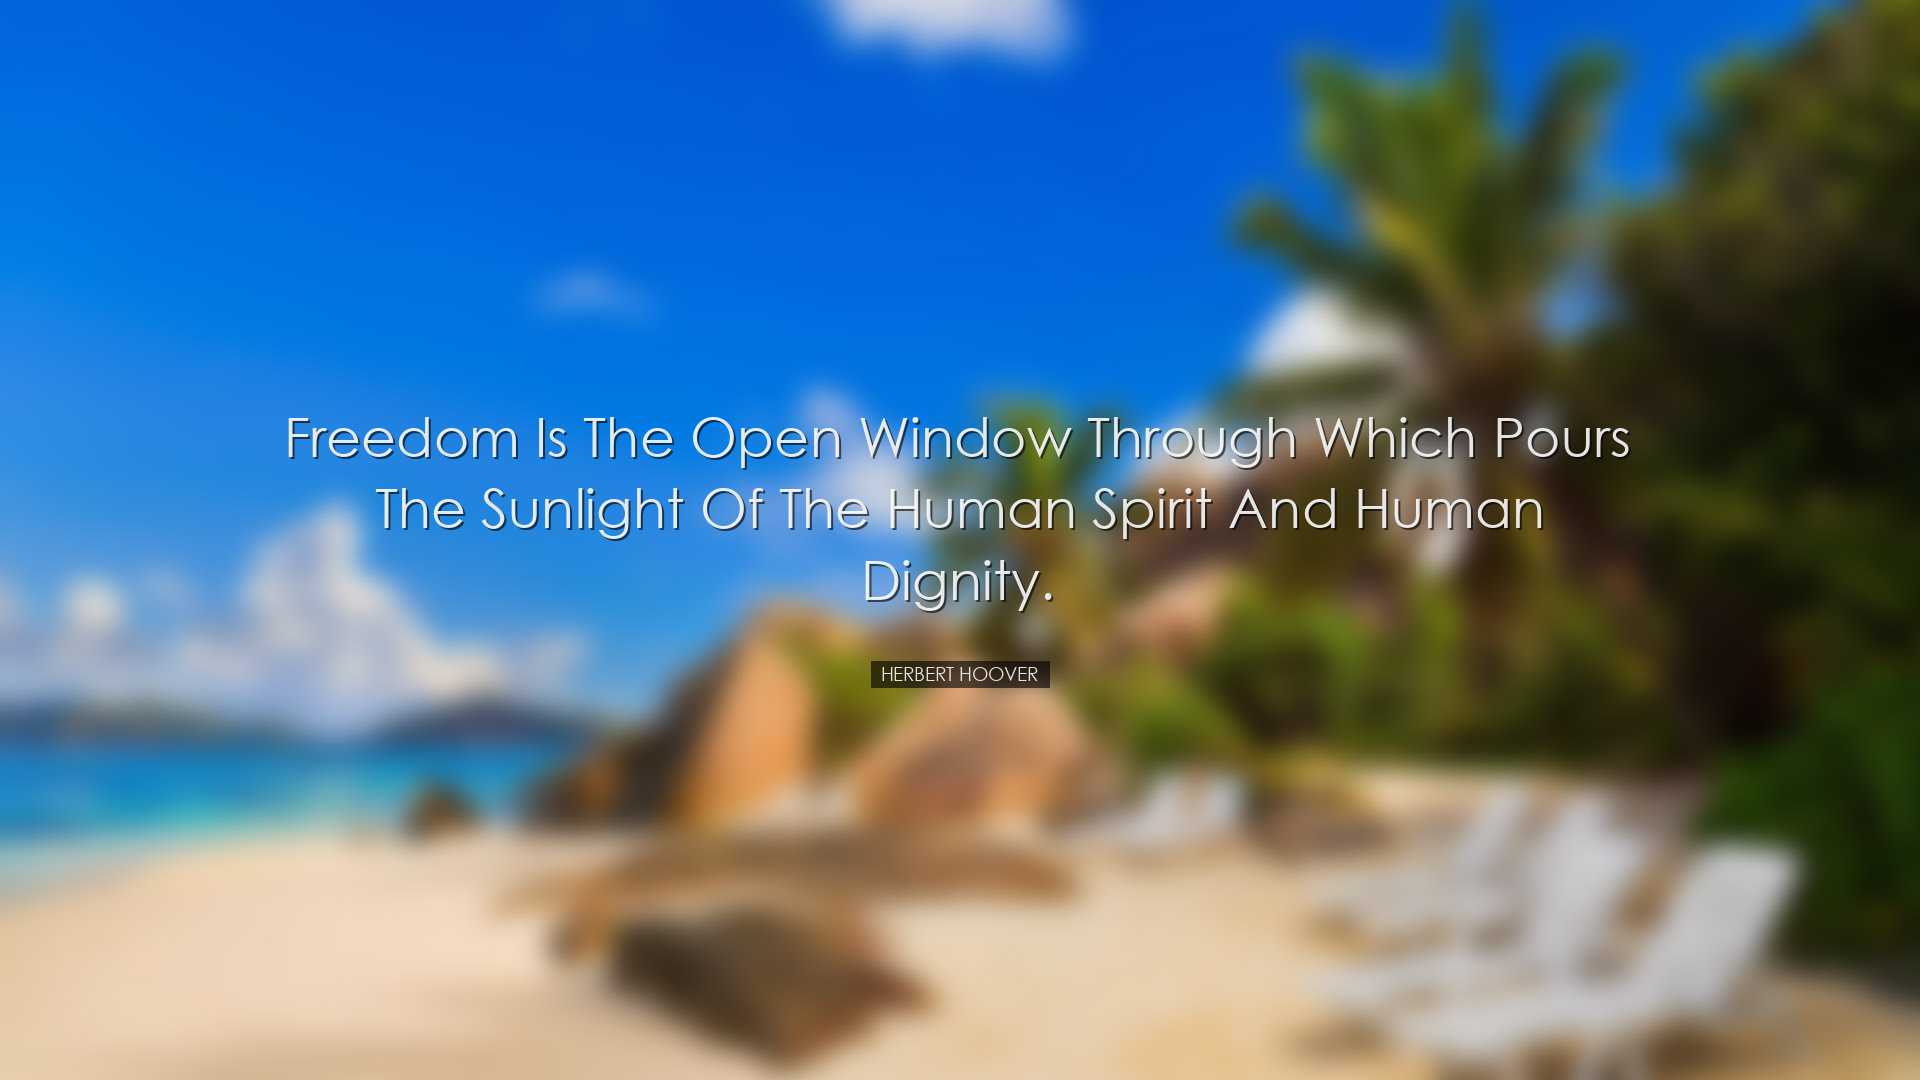 Freedom is the open window through which pours the sunlight of the